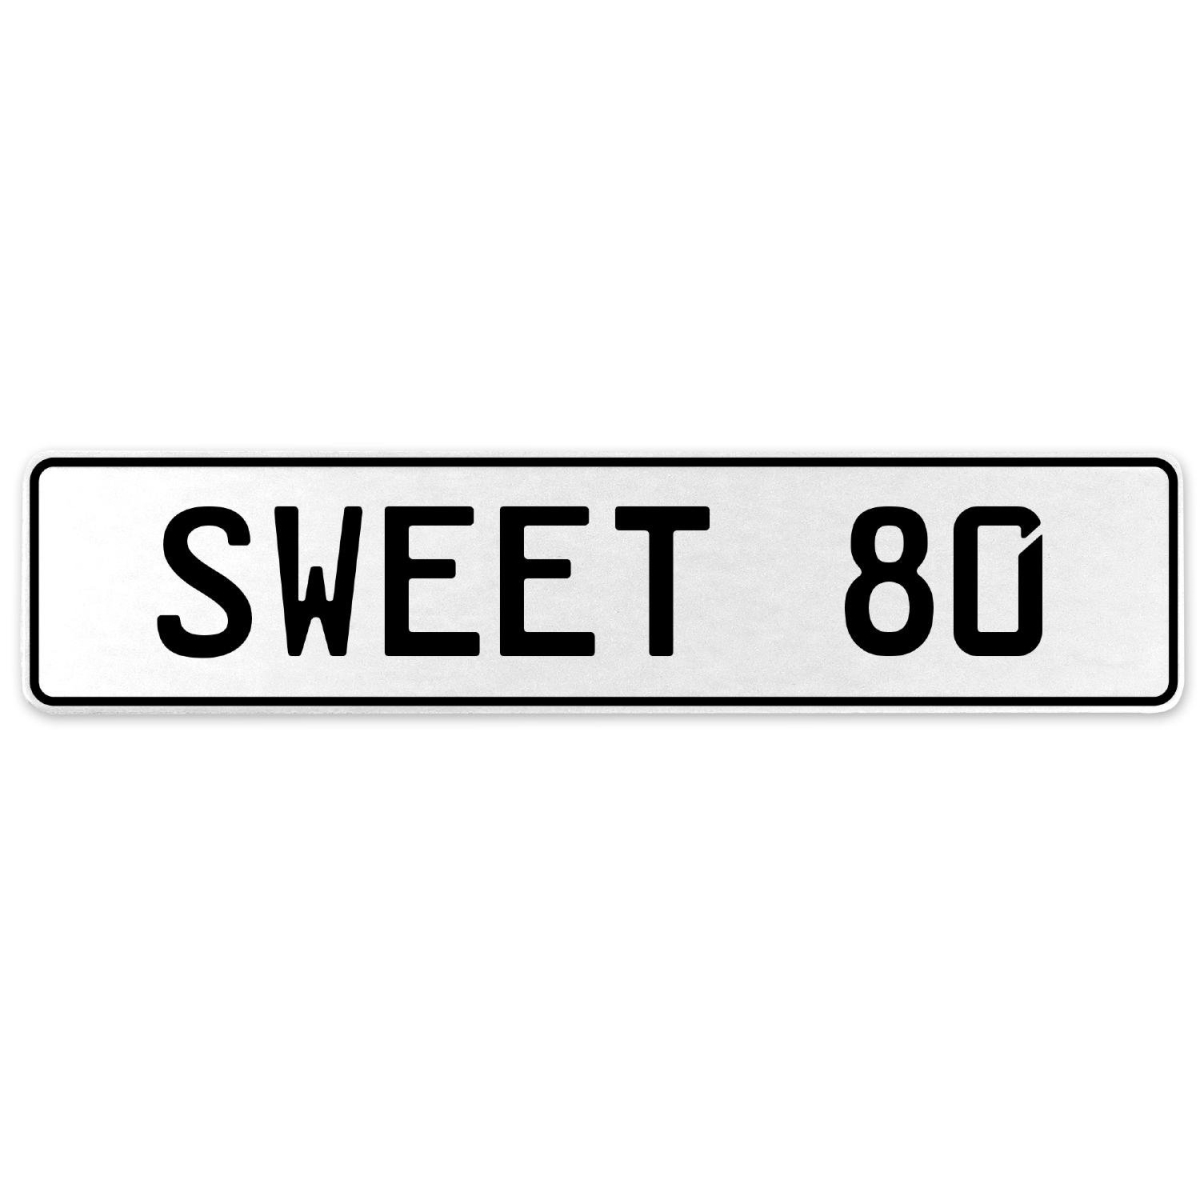 554182 Sweet 80 - White Aluminum Street Sign Mancave Euro Plate Name Door Sign Wall